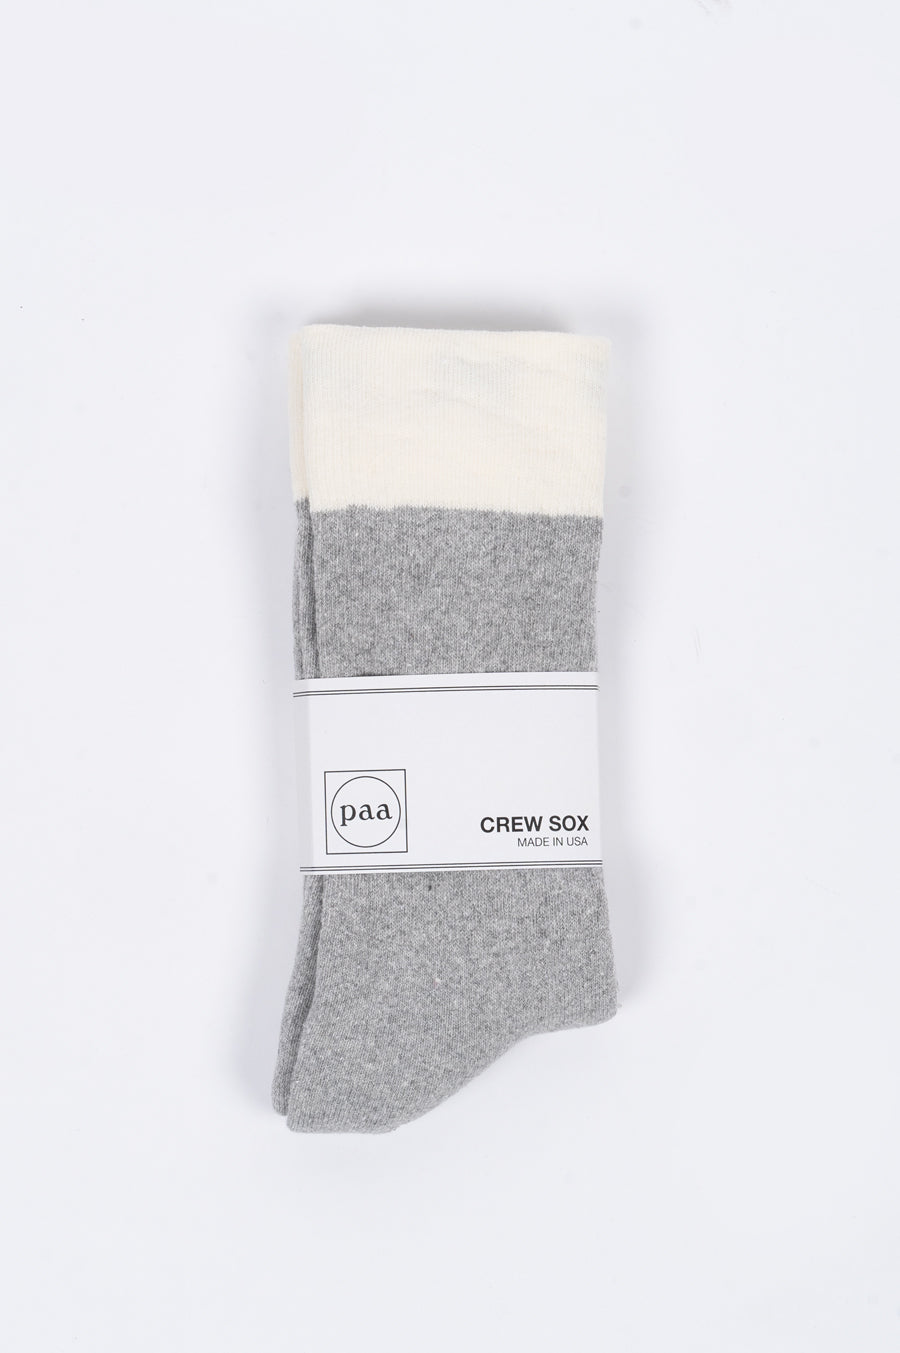 HOUSE OF PAA CREW SOX 2.5 GREY - BLENDS